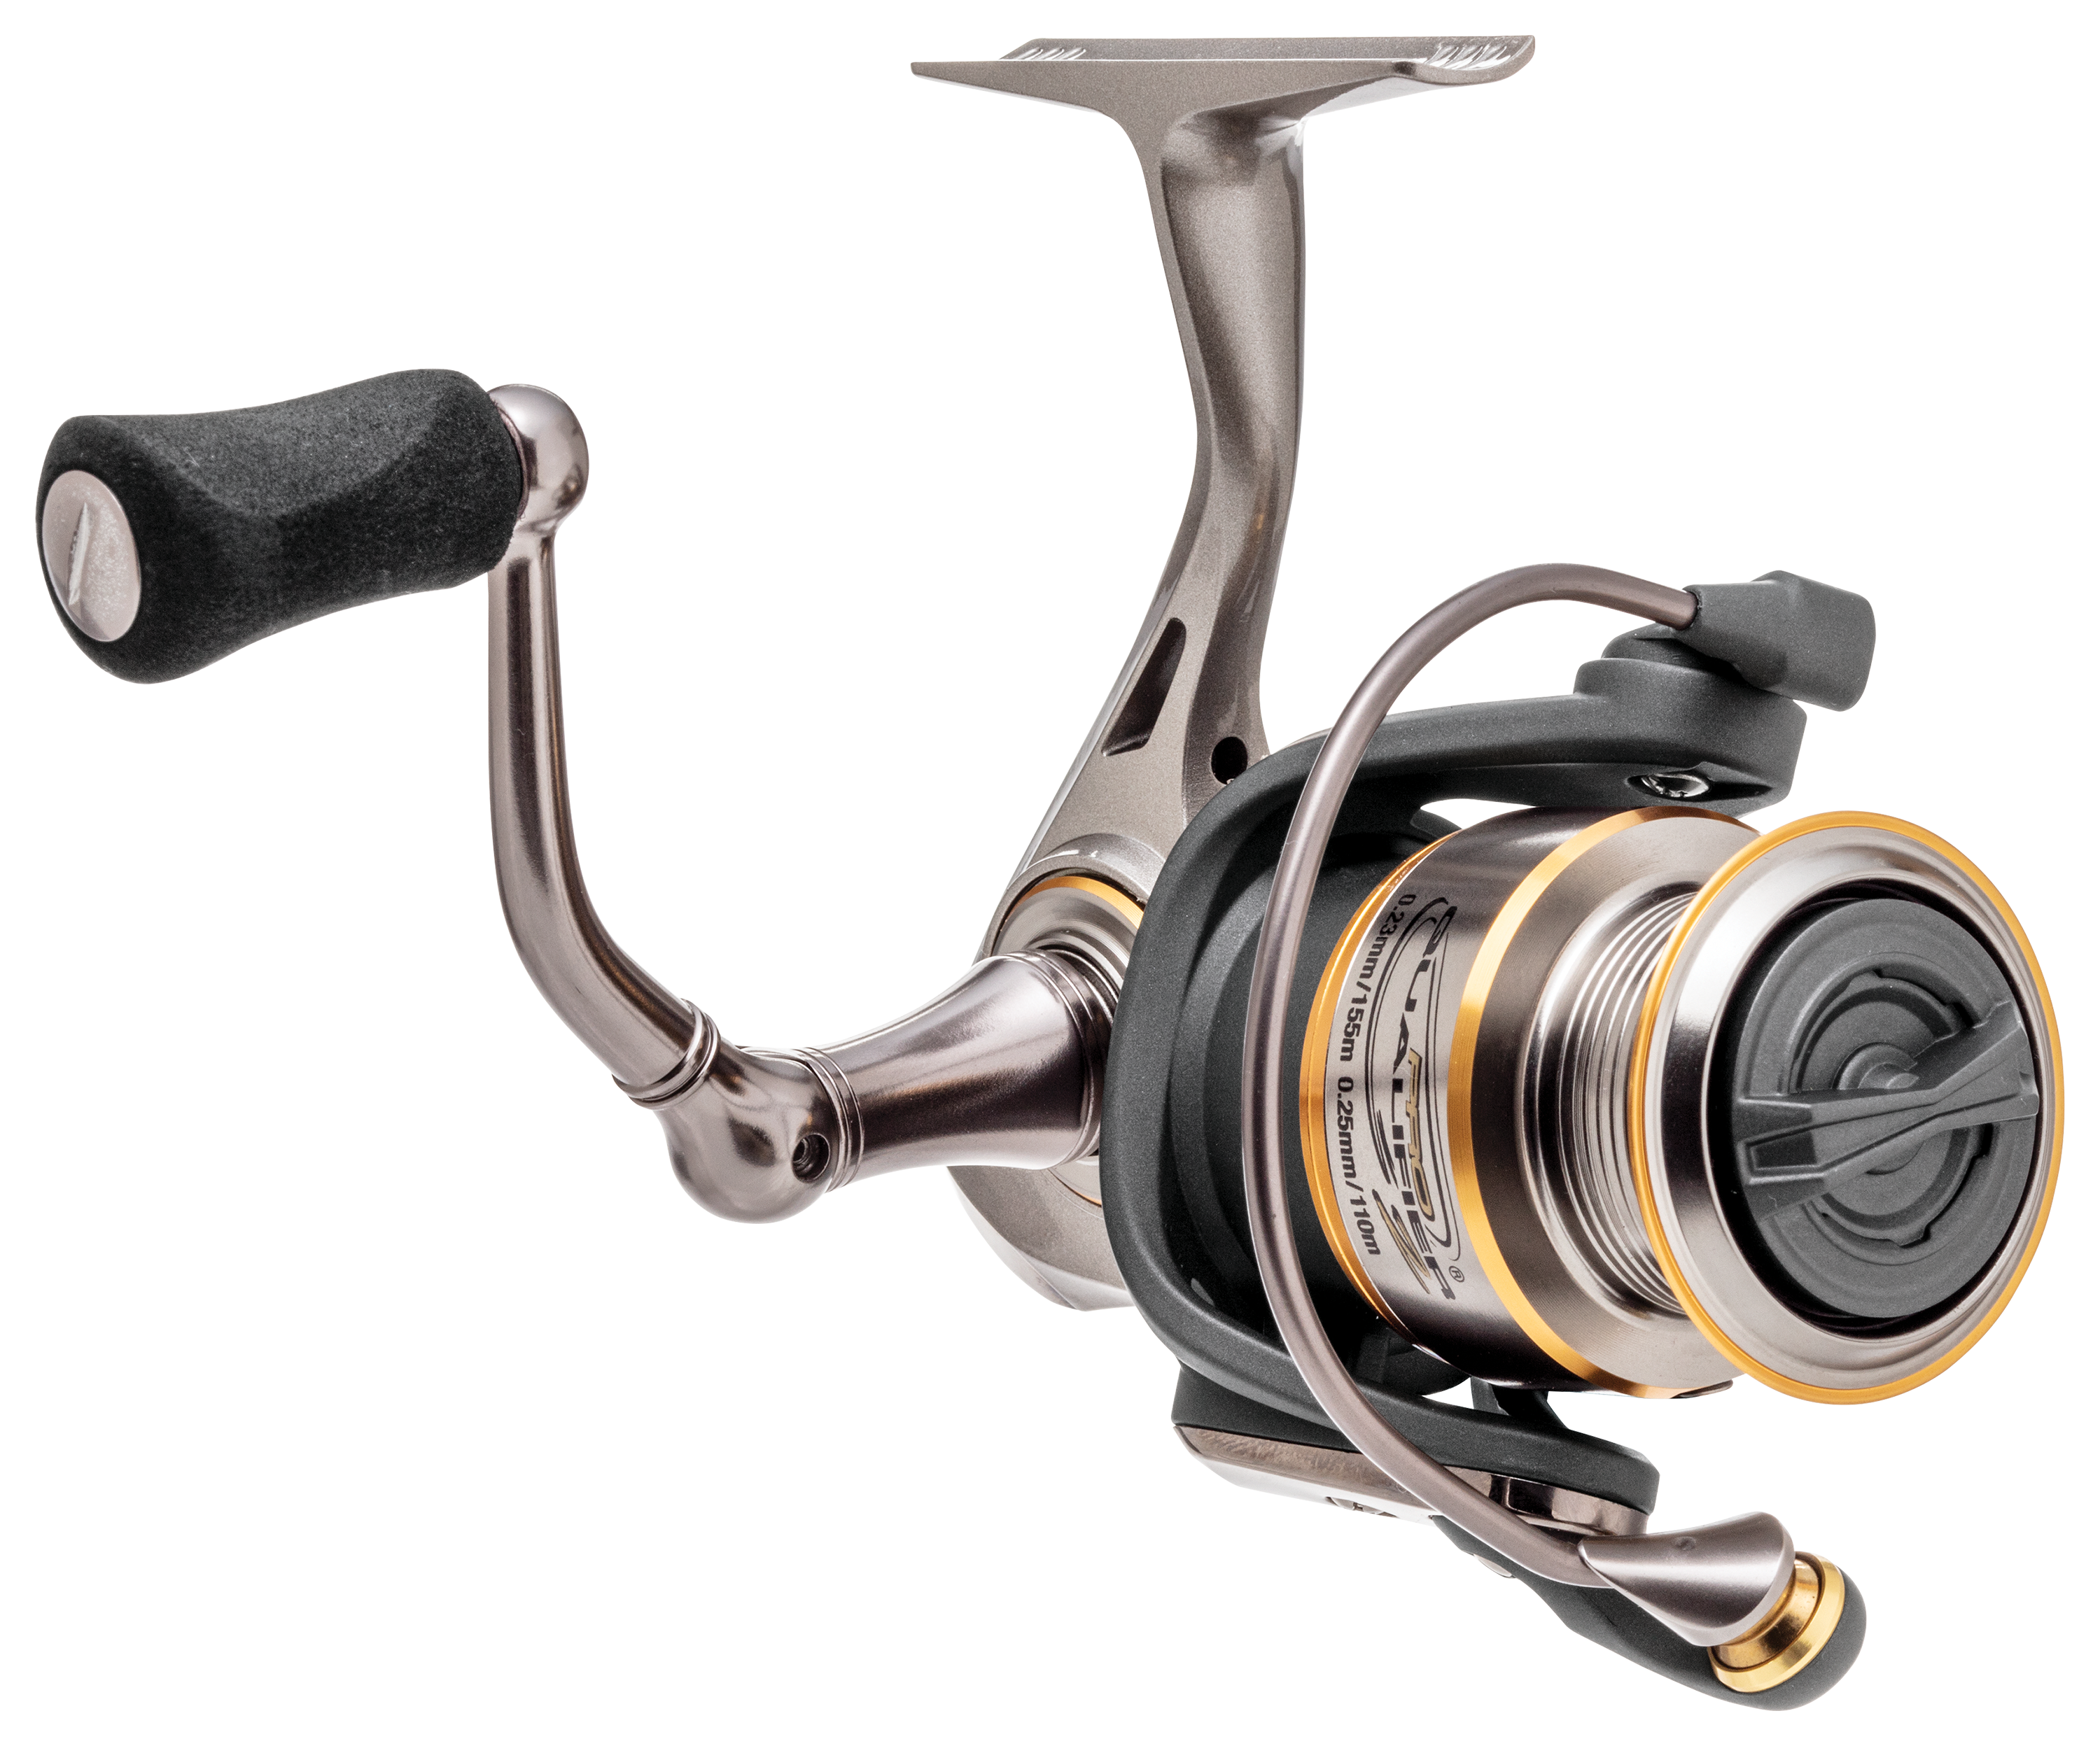 Bass Pro Shops Quick Draw Front Drag Spinning Reel - 30 Size